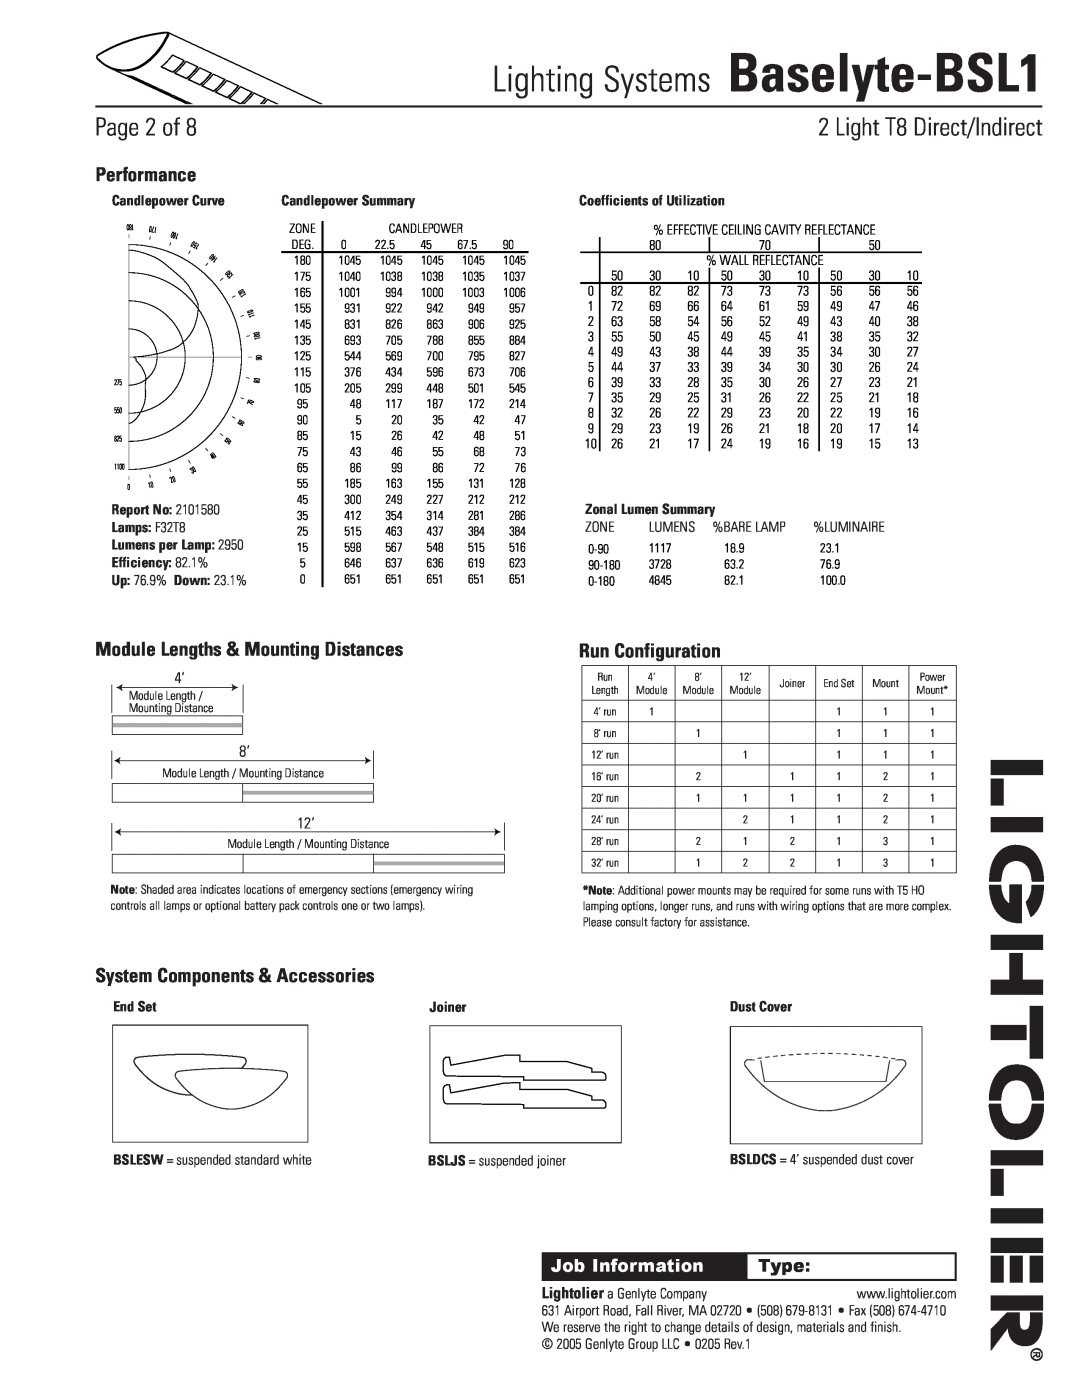 Lightolier Lighting Systems Baselyte-BSL1, Module Lengths & Mounting Distances, Run Configuration, Type, Performance 